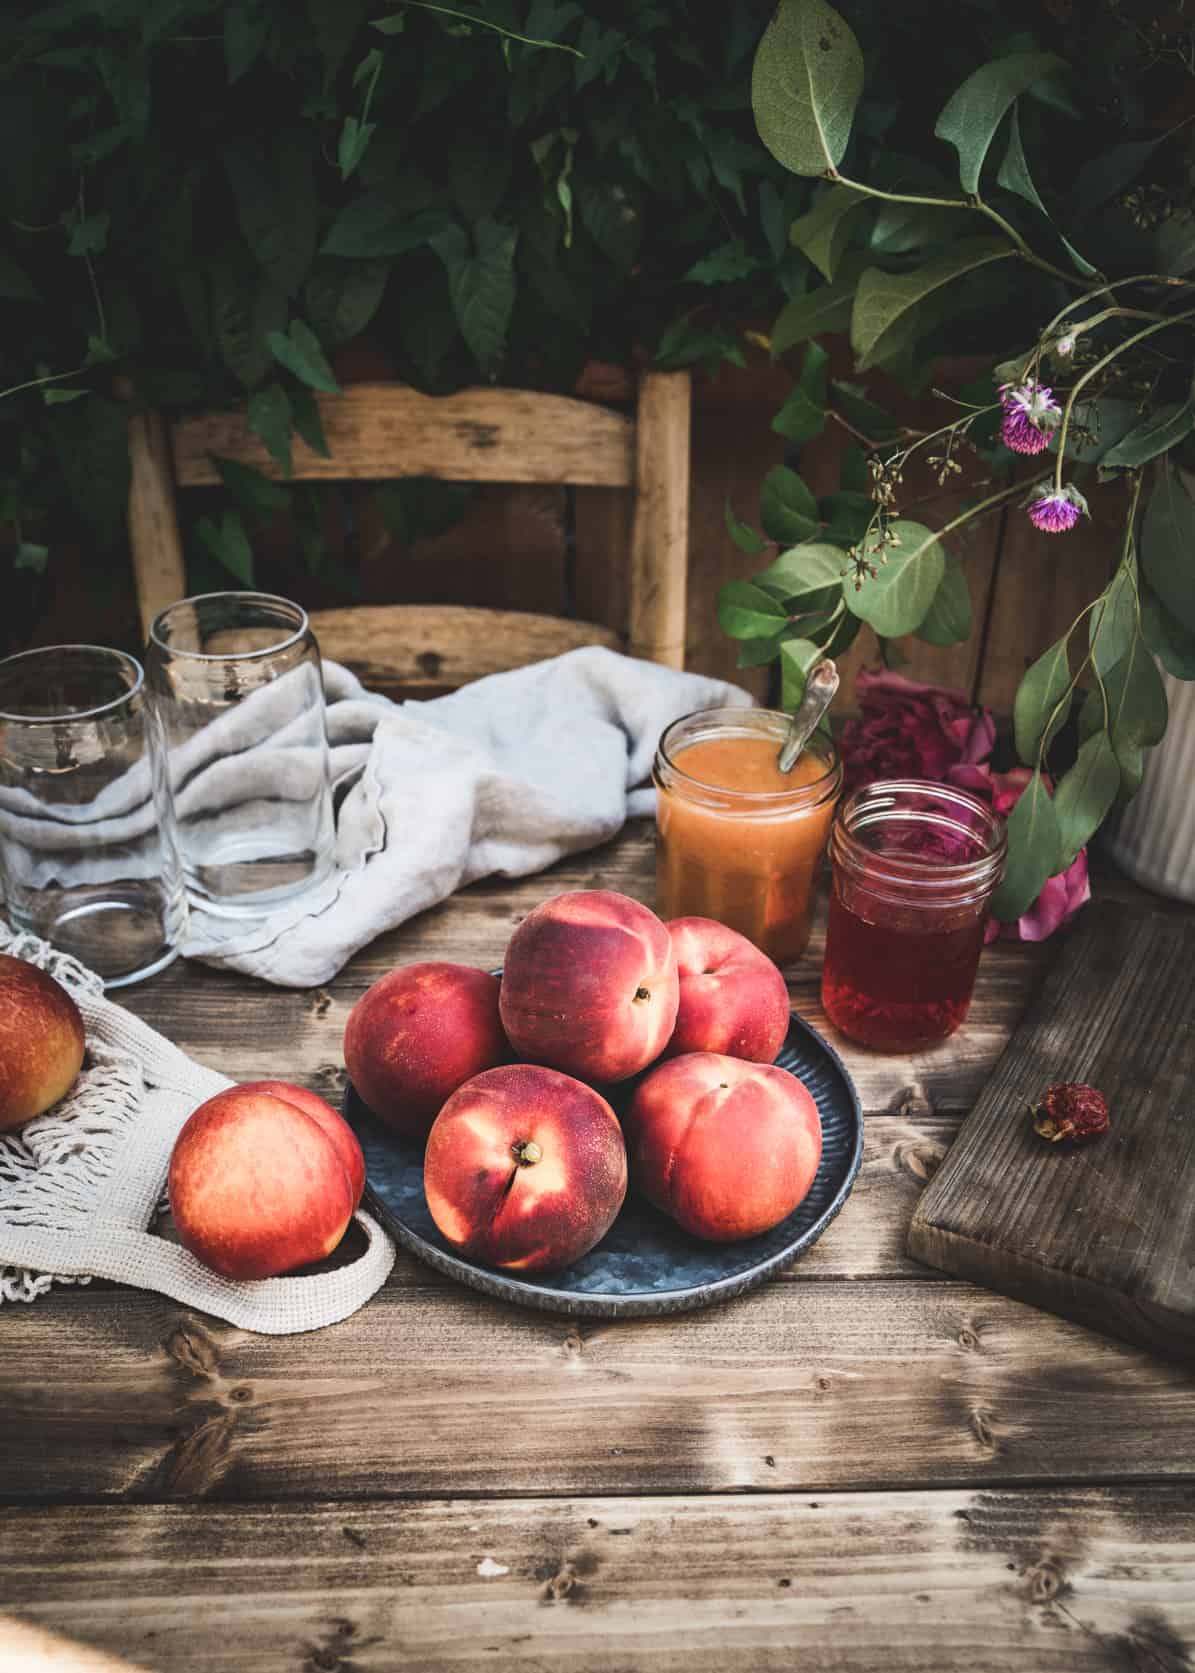 Whole fresh peaches on metal plate on wood table.  Peach puree and peach simple syrup are in glass jars behind the plate, and empty glasses are on the table.  Greenery surrounds the table. 